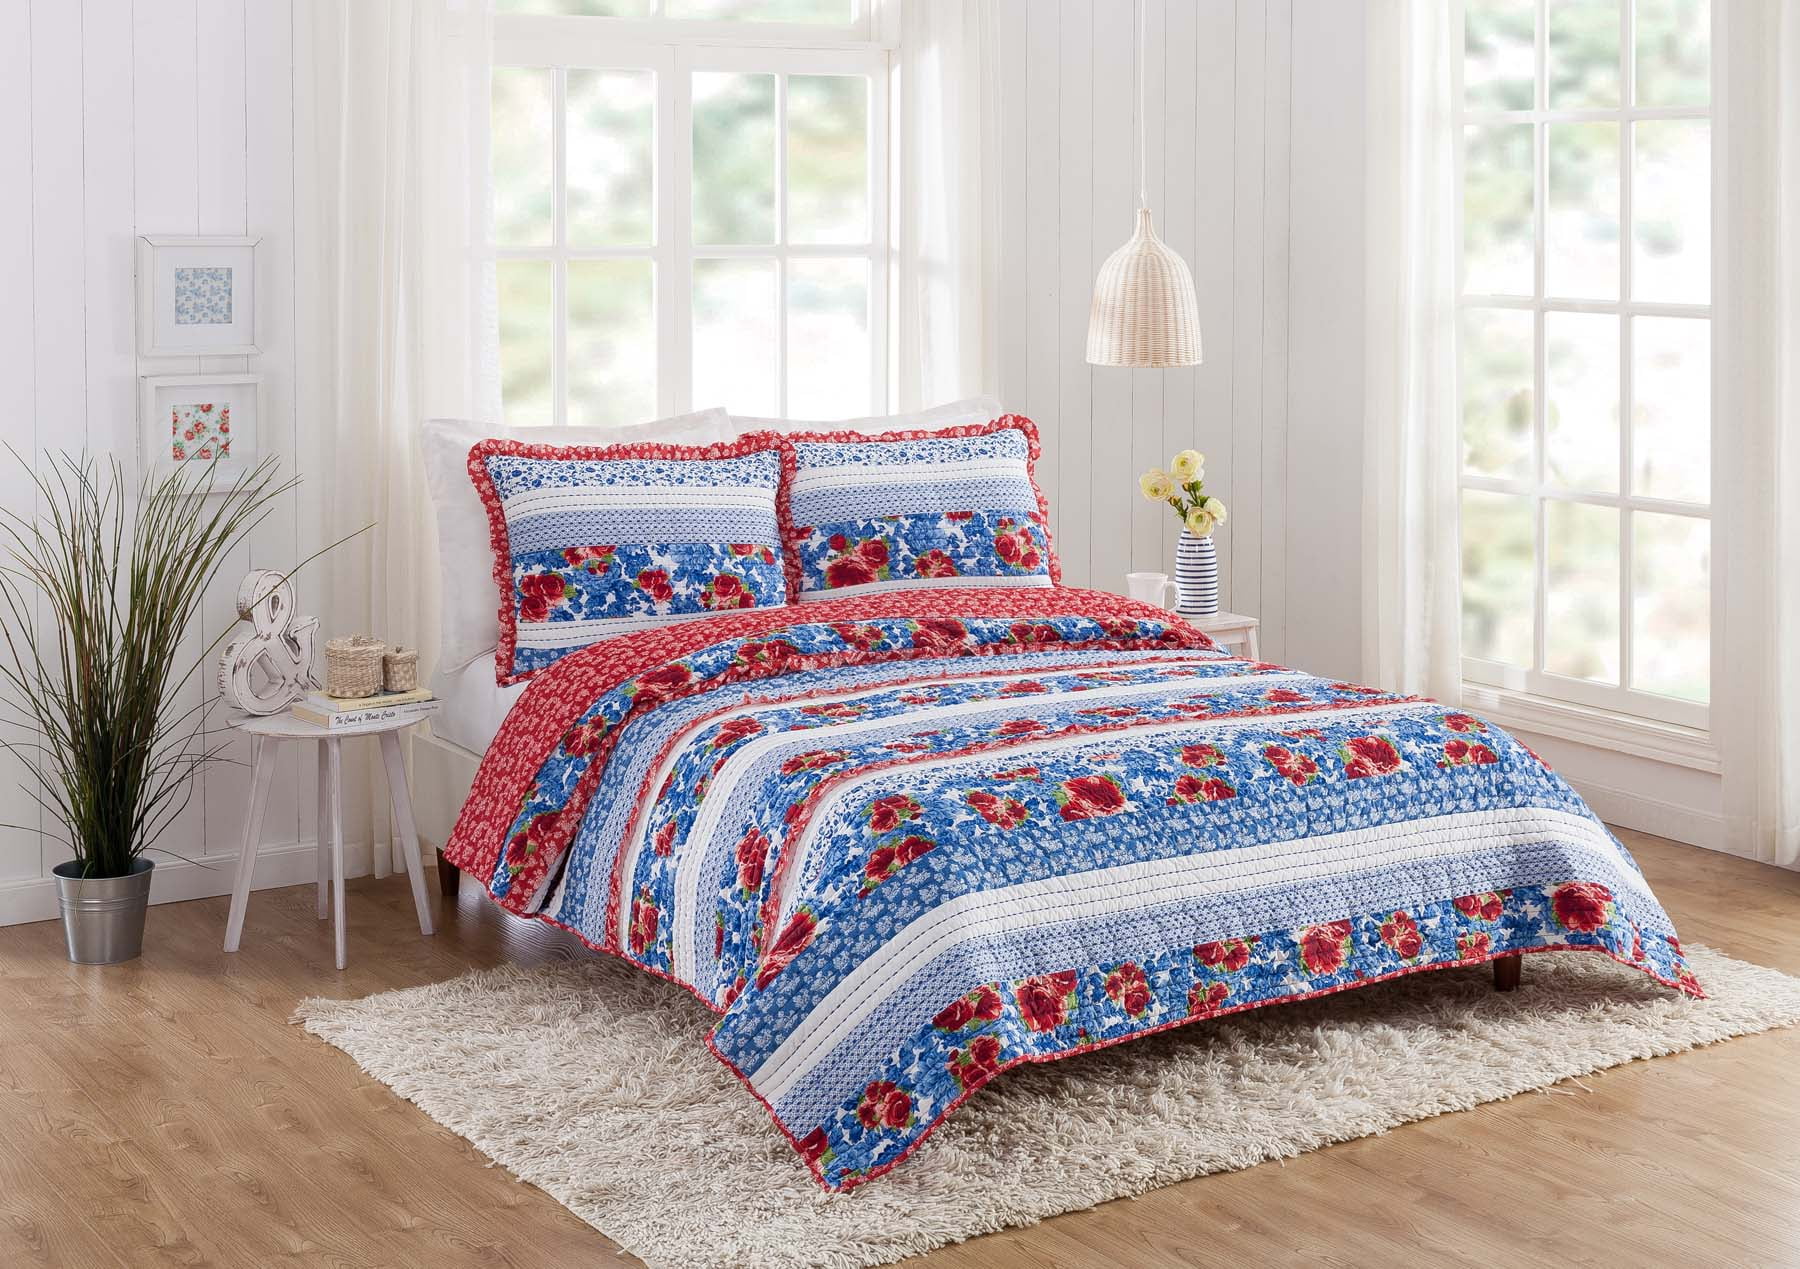 The Pioneer Woman Blue Heritage Floral 2-Piece Cotton KIng Sham Set 